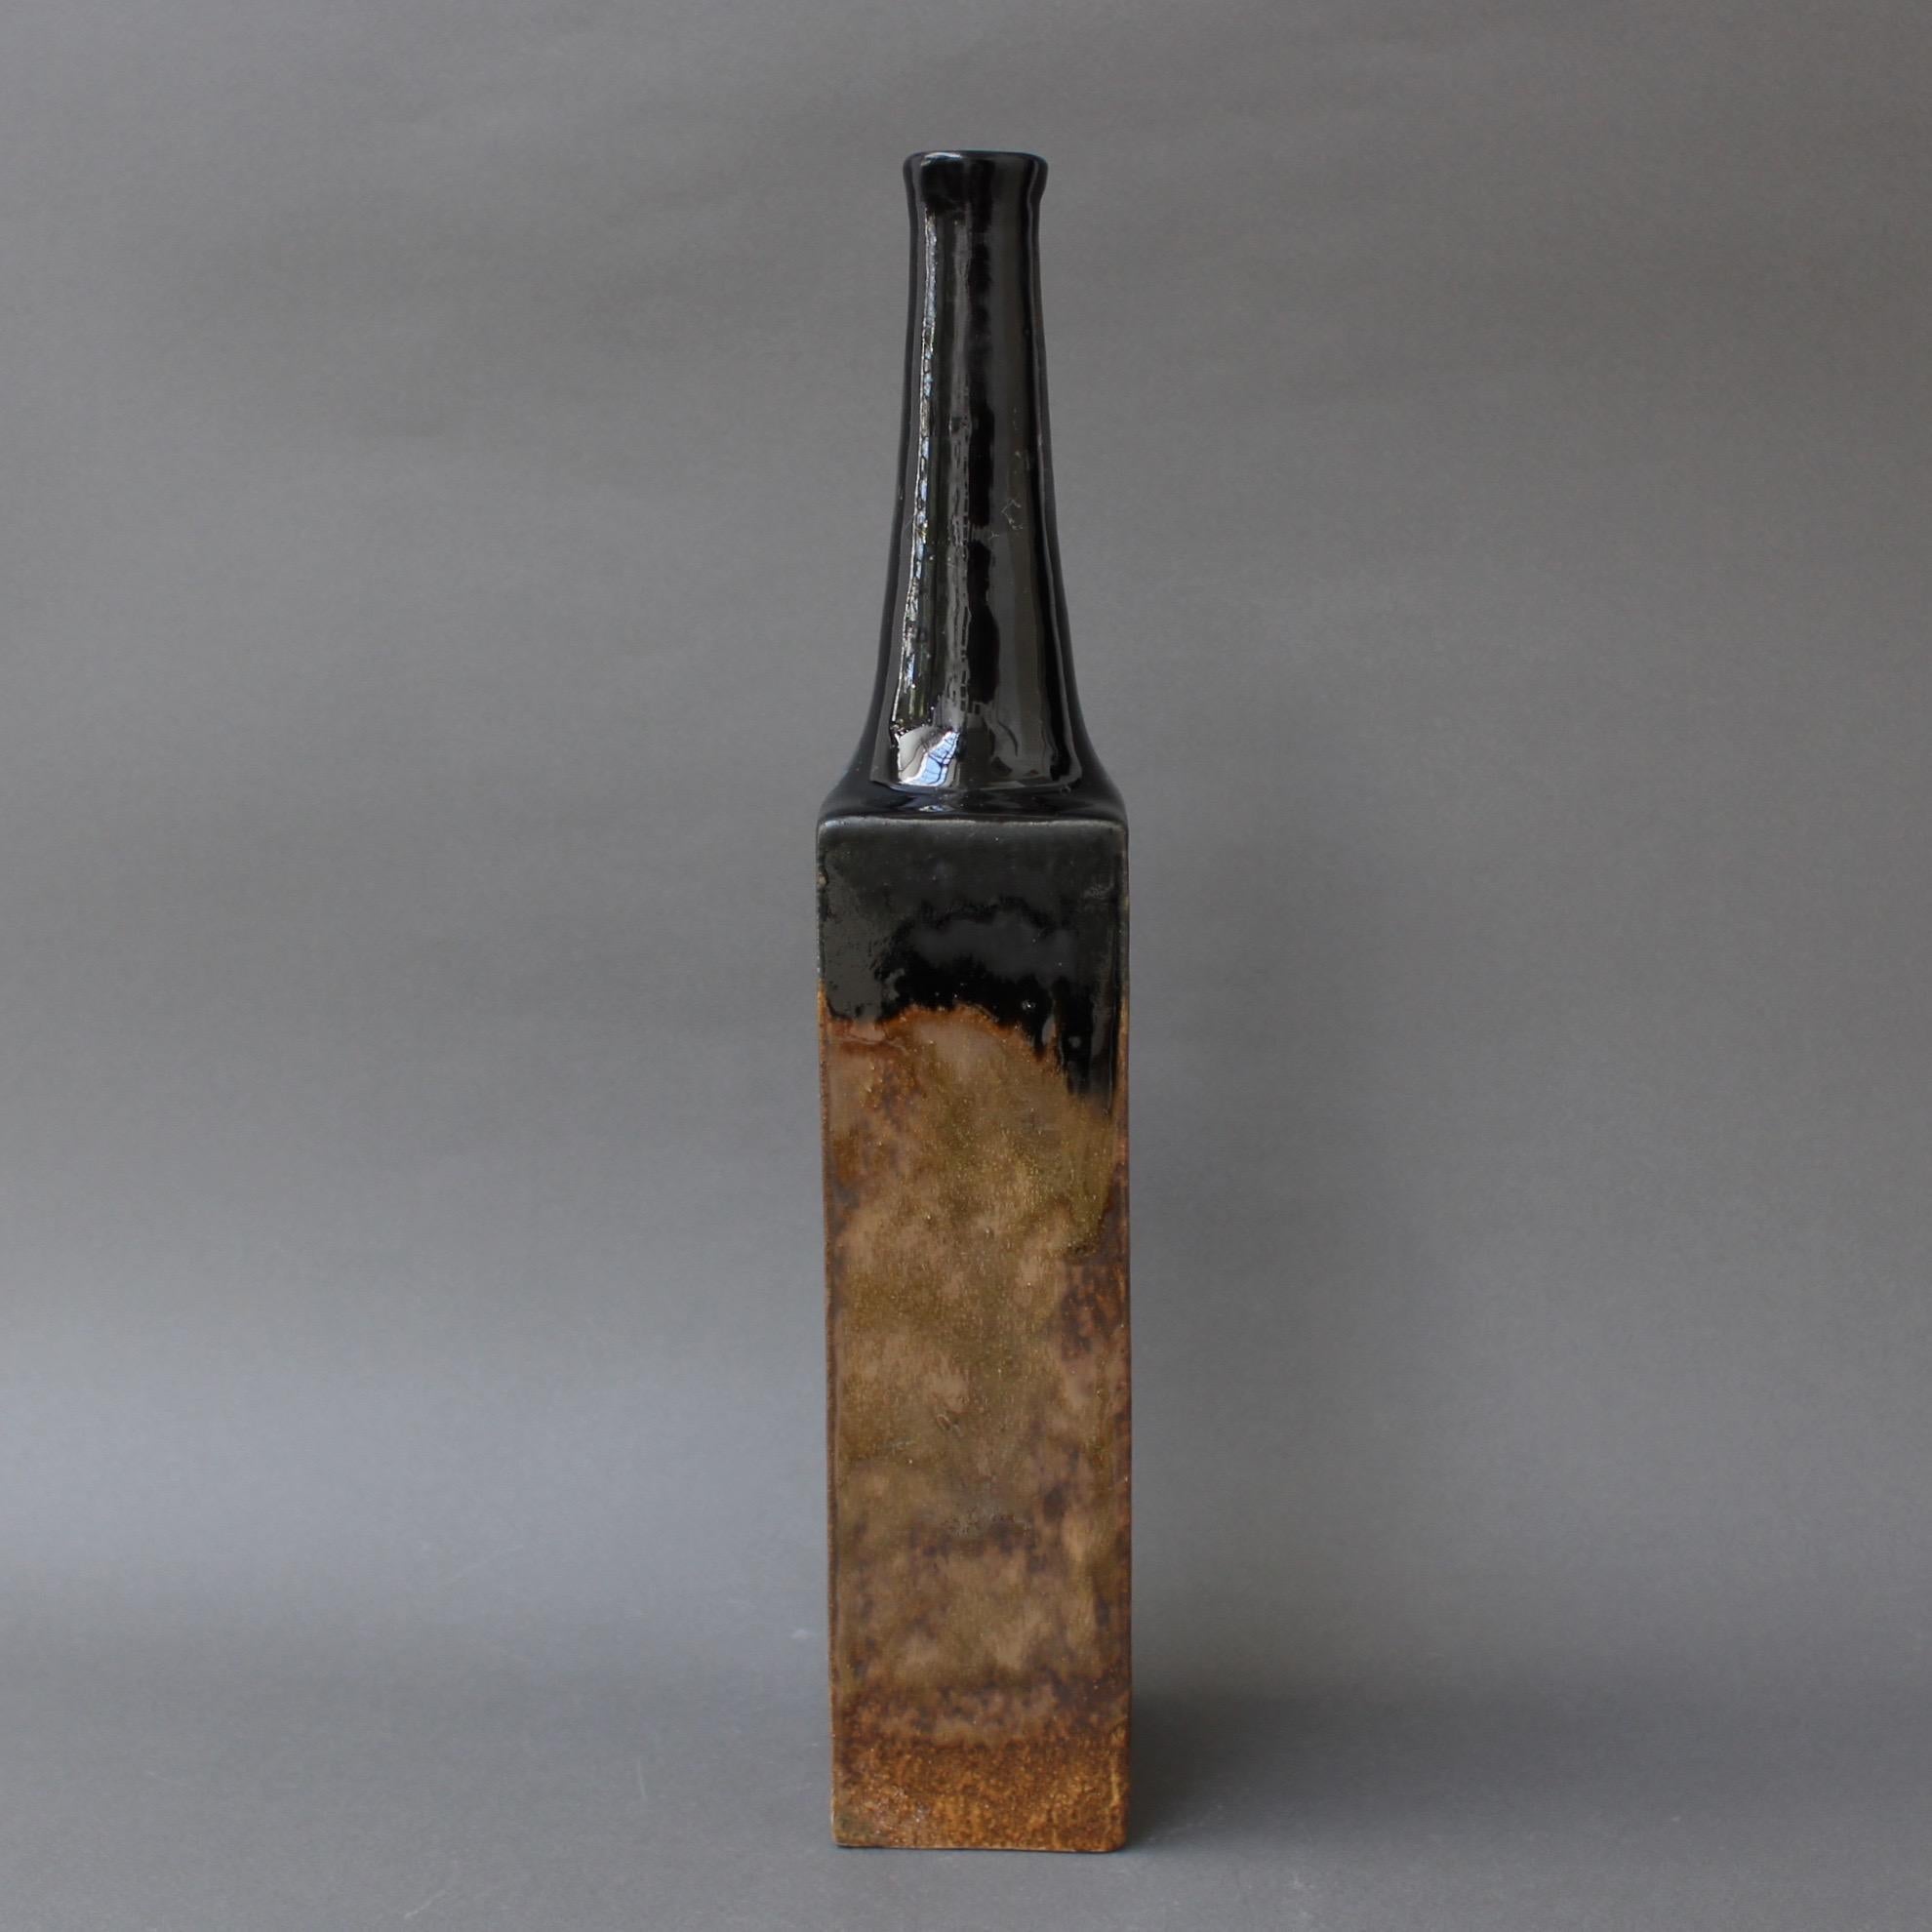 Glazed Black and Chocolate Brown Ceramic Bottle-Shaped Vase by Bruno Gambone, c. 1980s For Sale